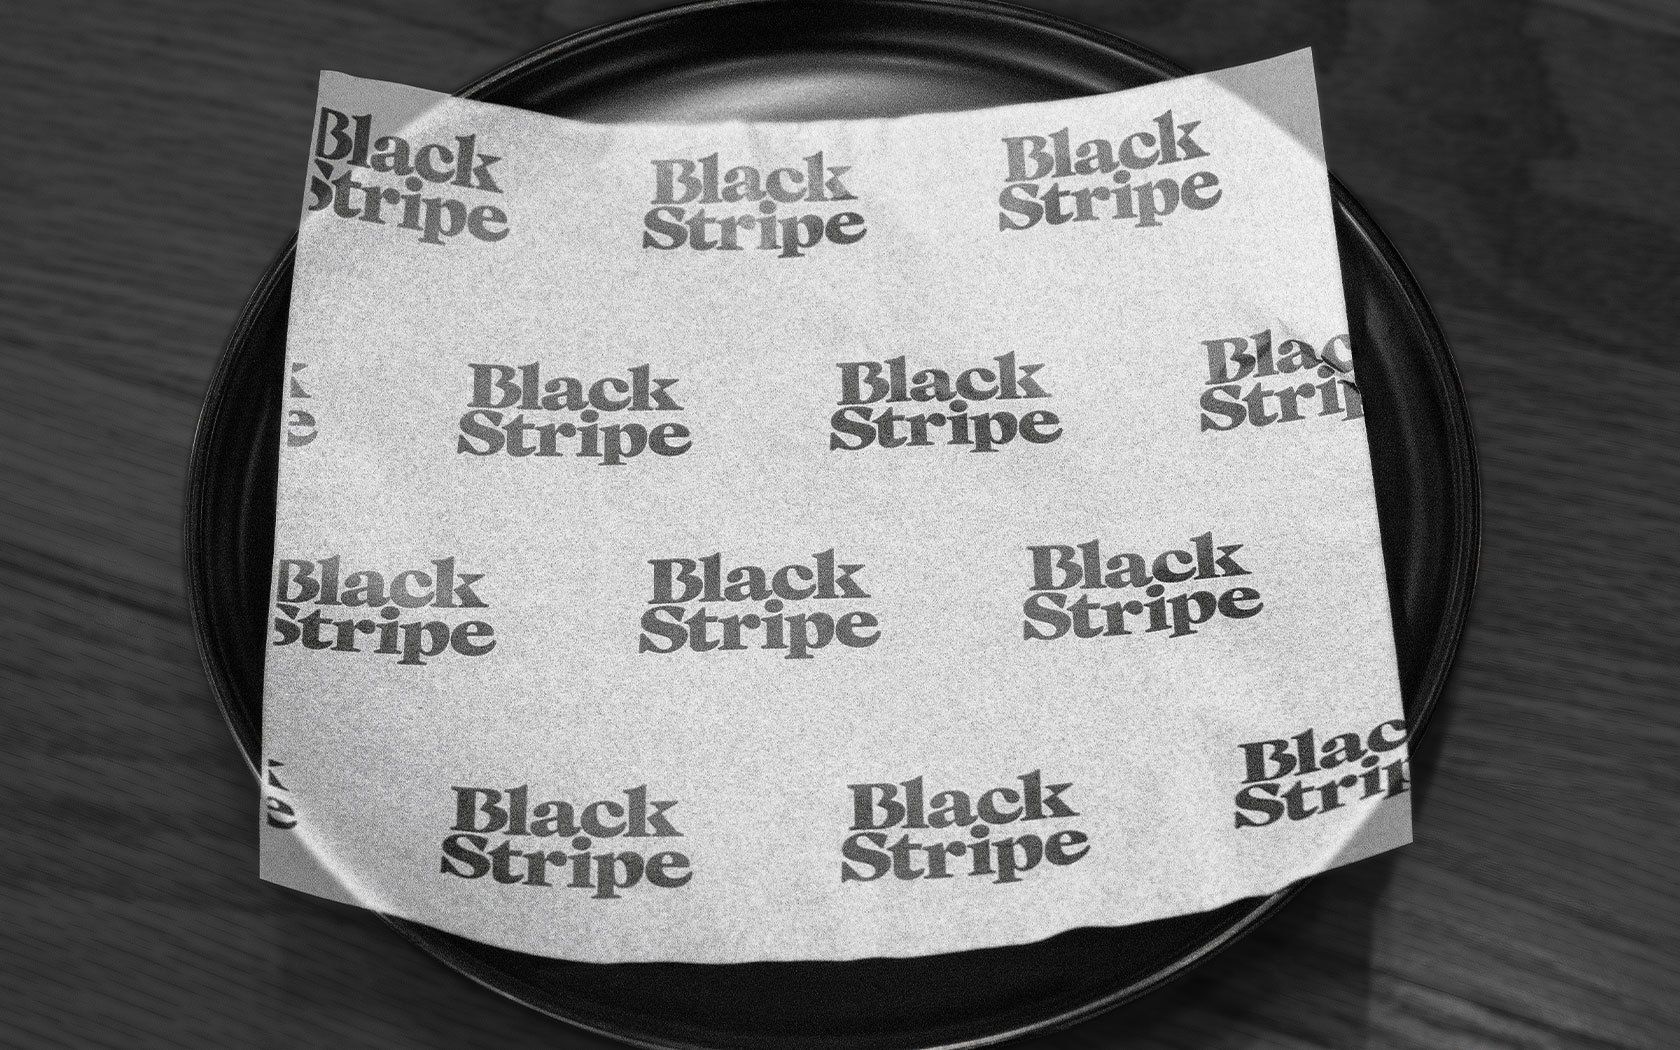 Black Stripe. Wrapping paper with brand logo